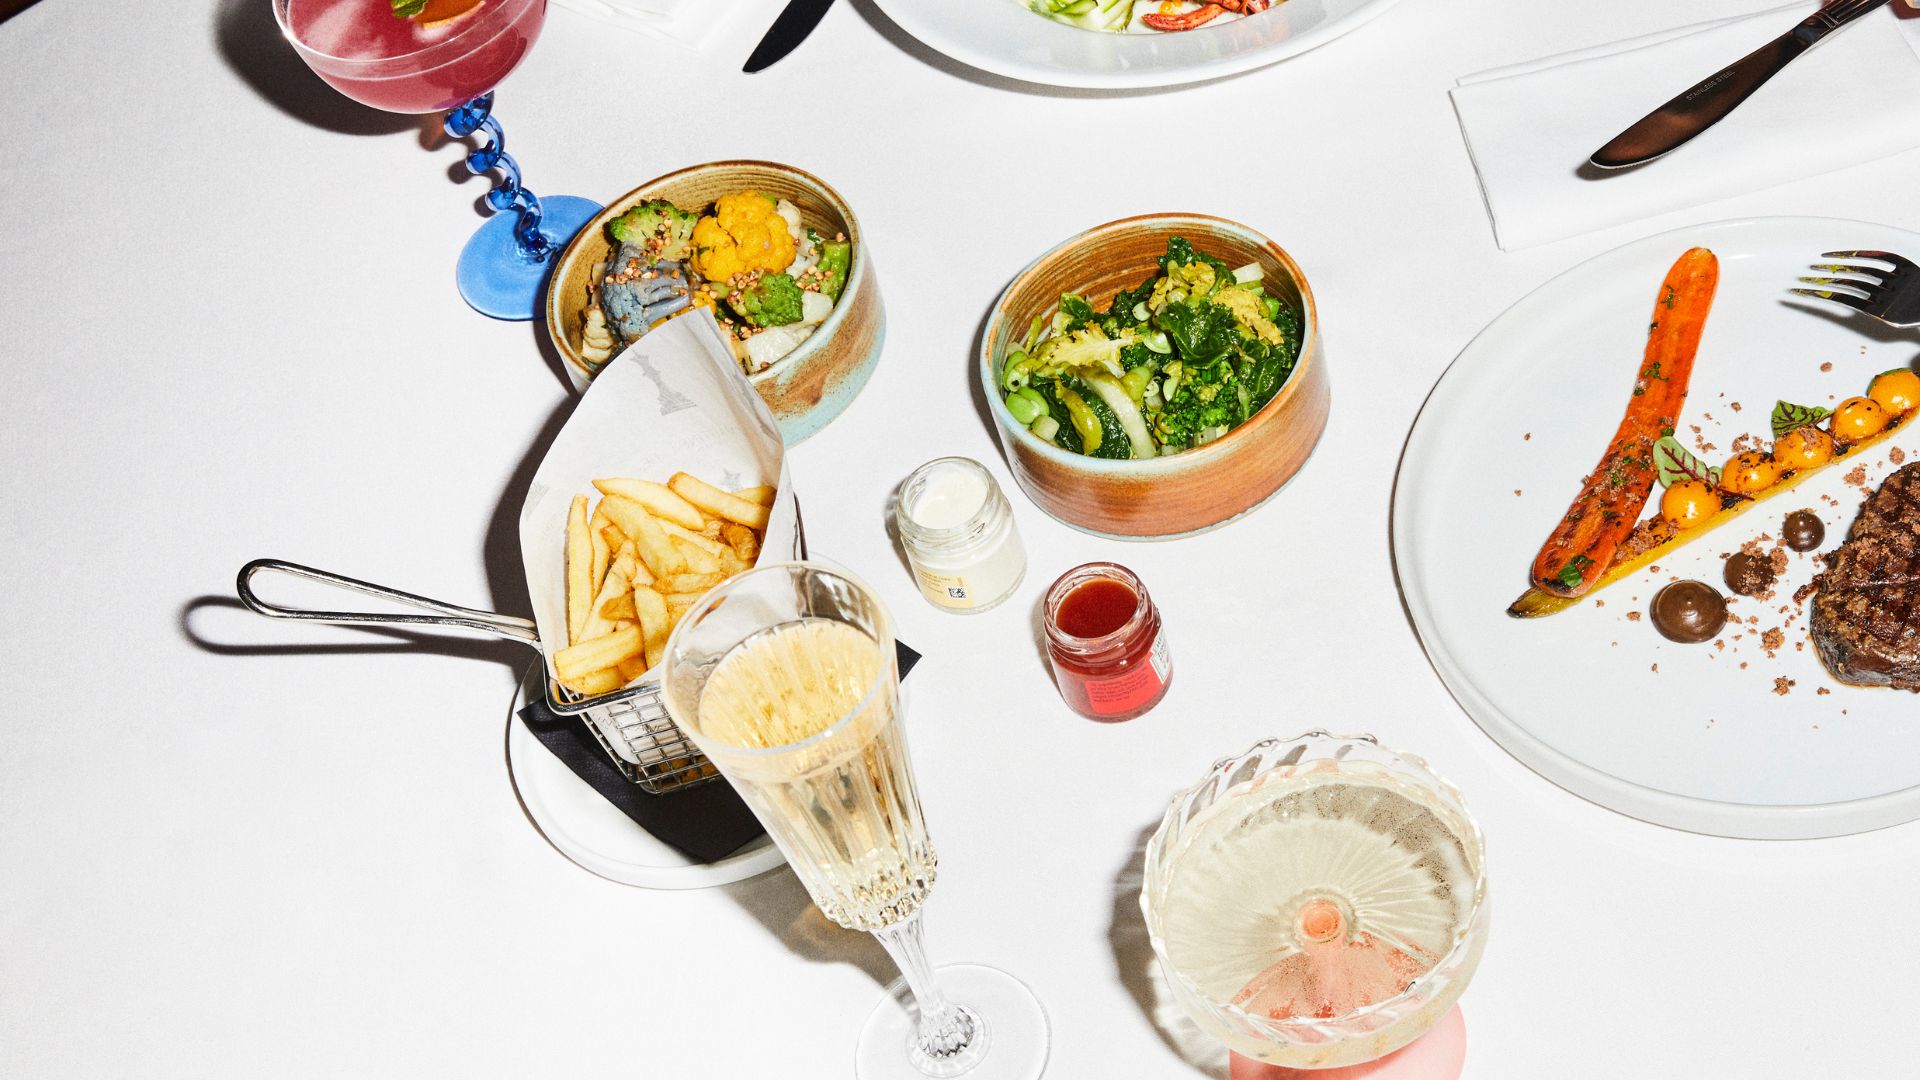 Fries, champagne, greens, steak, and other cocktails on a white table